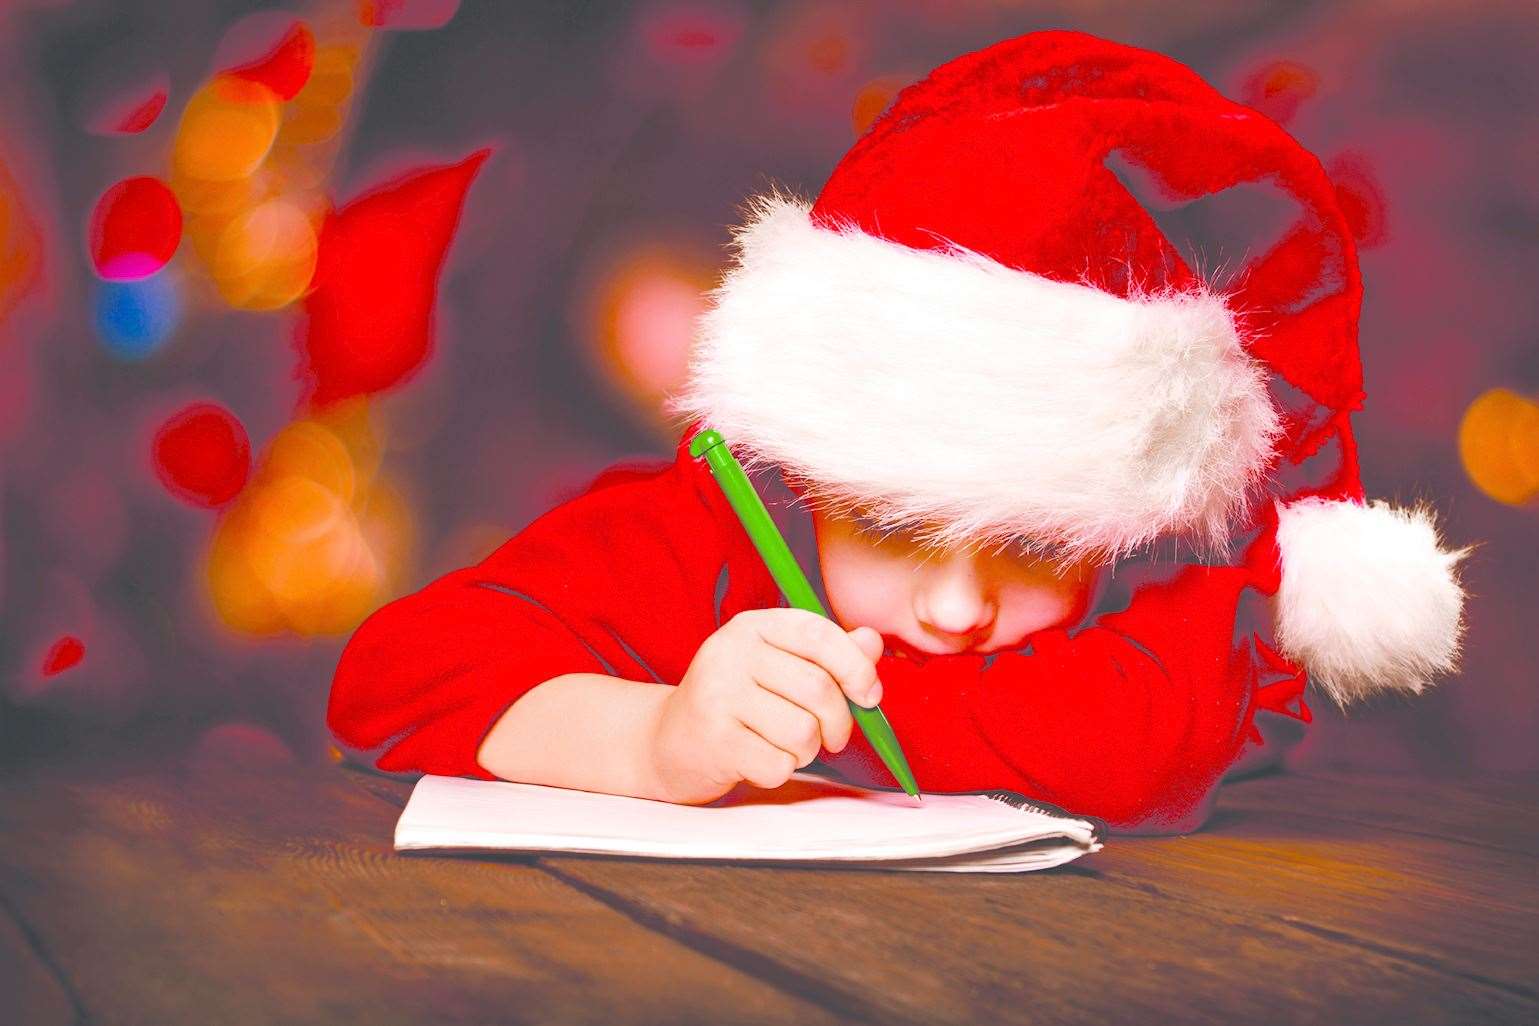 Spend some time this weekend writing to Santa